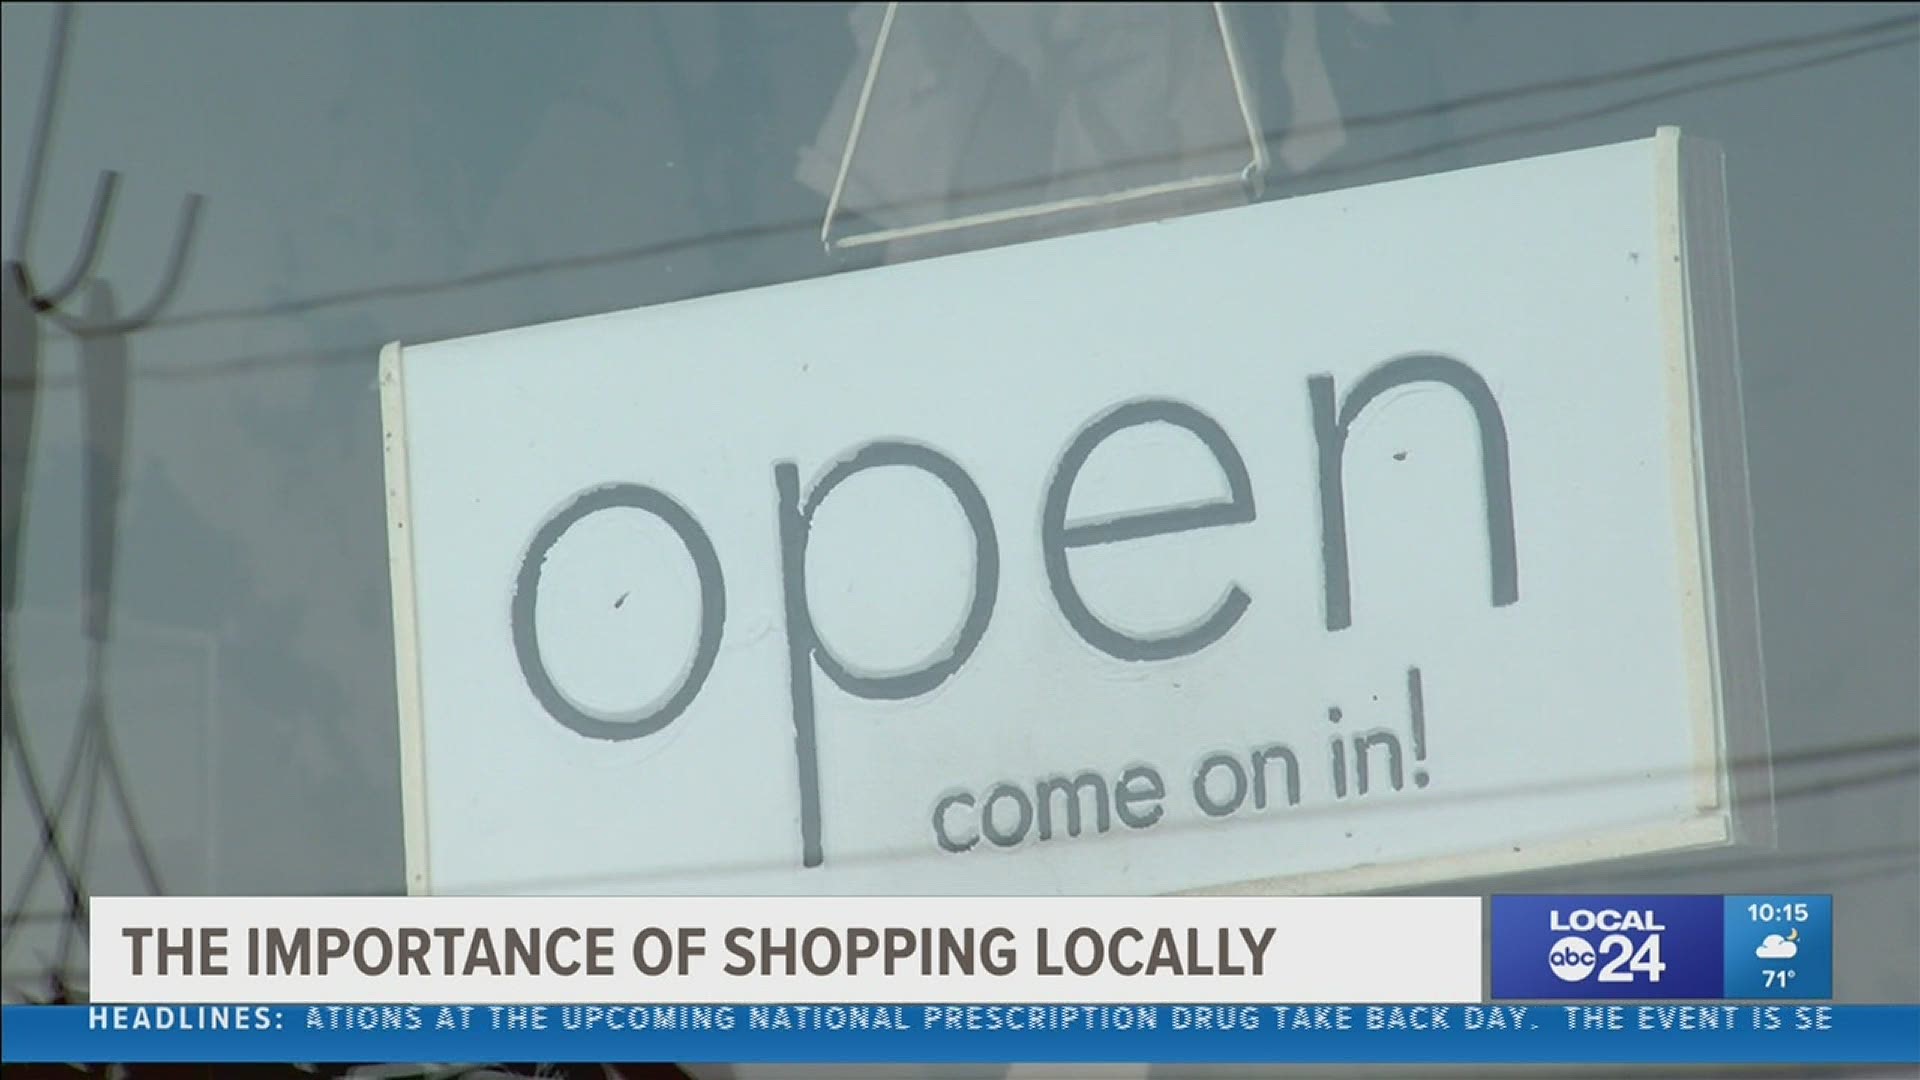 Local businesses are relying on shoppers this holiday season to catch up from lost revenue due to COVID-19.